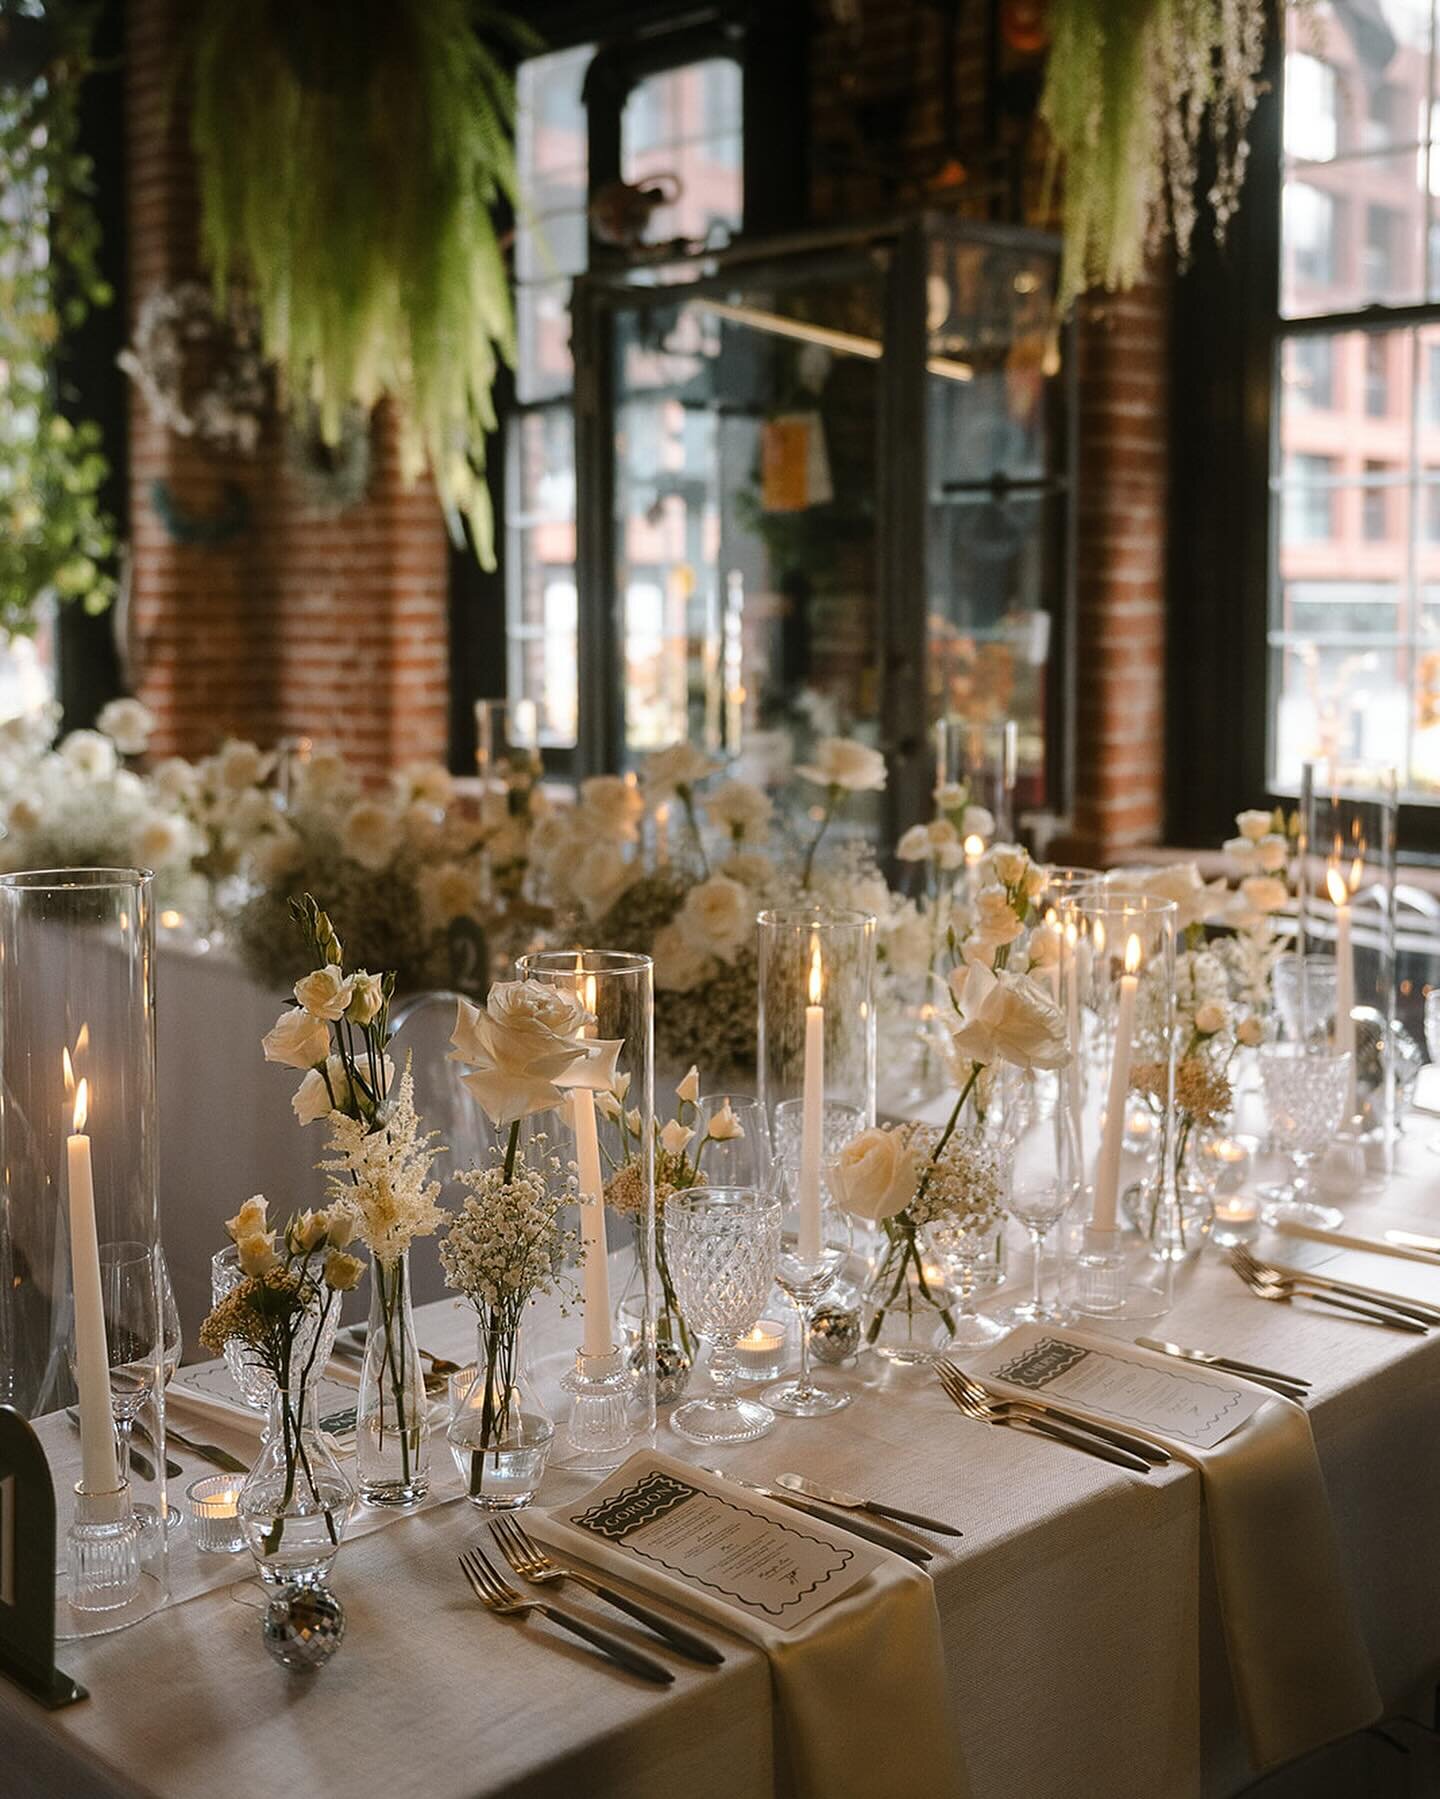 Style on point for M &amp; C&rsquo;s intimate wedding @marcheitalienlerichmond aka the cutest Italian deli in Griffintown ✨🪩

The amazing team that brought it to life: 
Planning and styling @le_coeur_boheme 
Venue @marcheitalienlerichmond 
Florist @